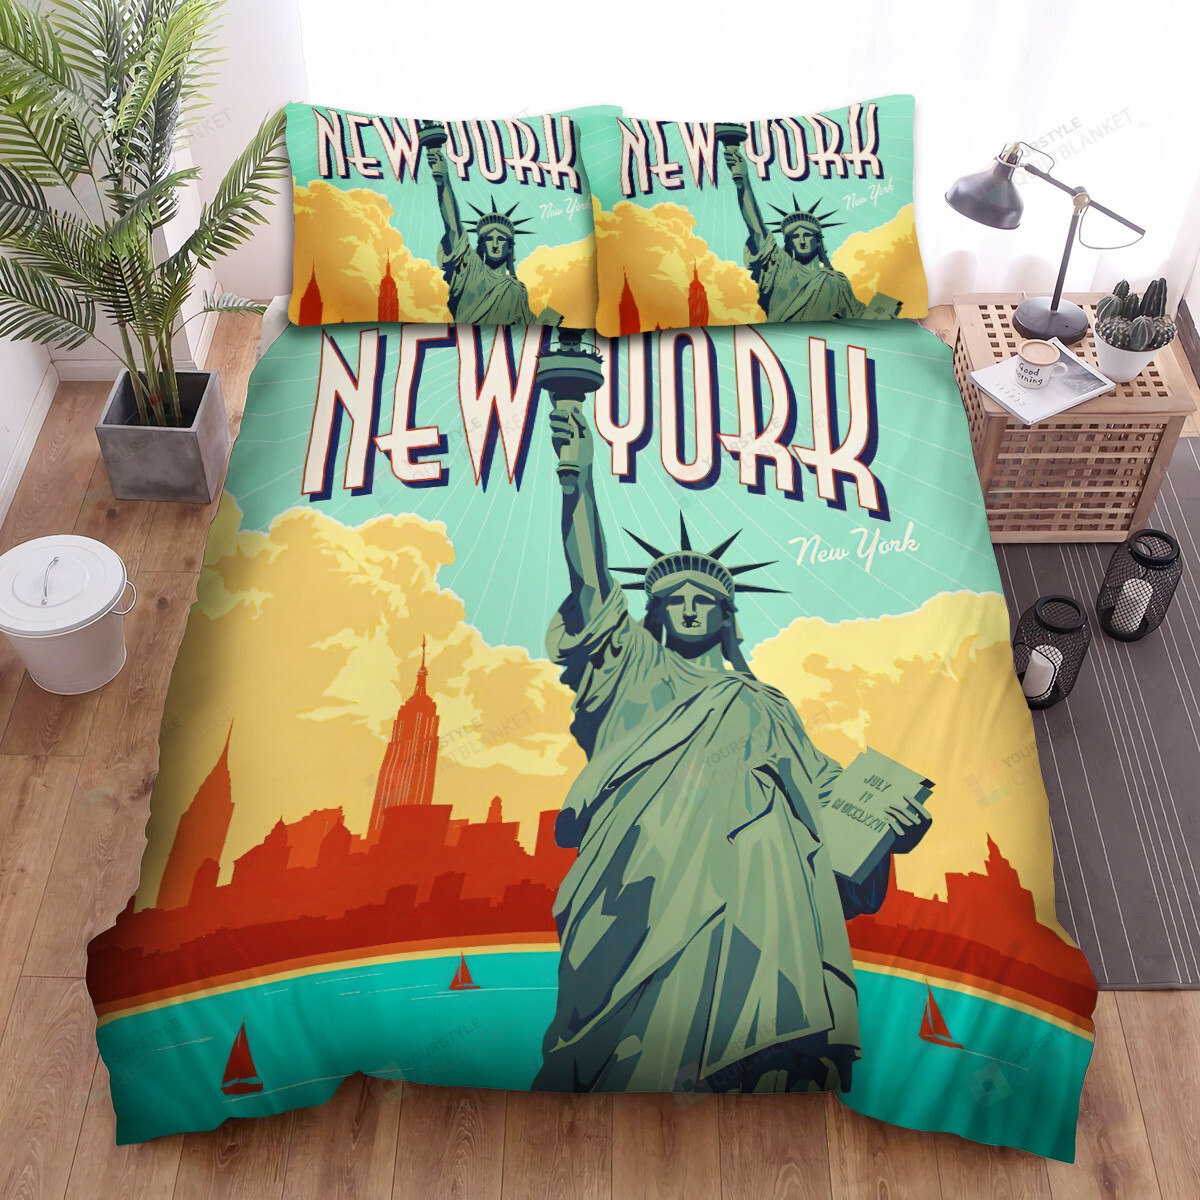 New York Statue Of Liberty Illustration Bed Sheets Spread Comforter Duvet Cover Bedding Sets